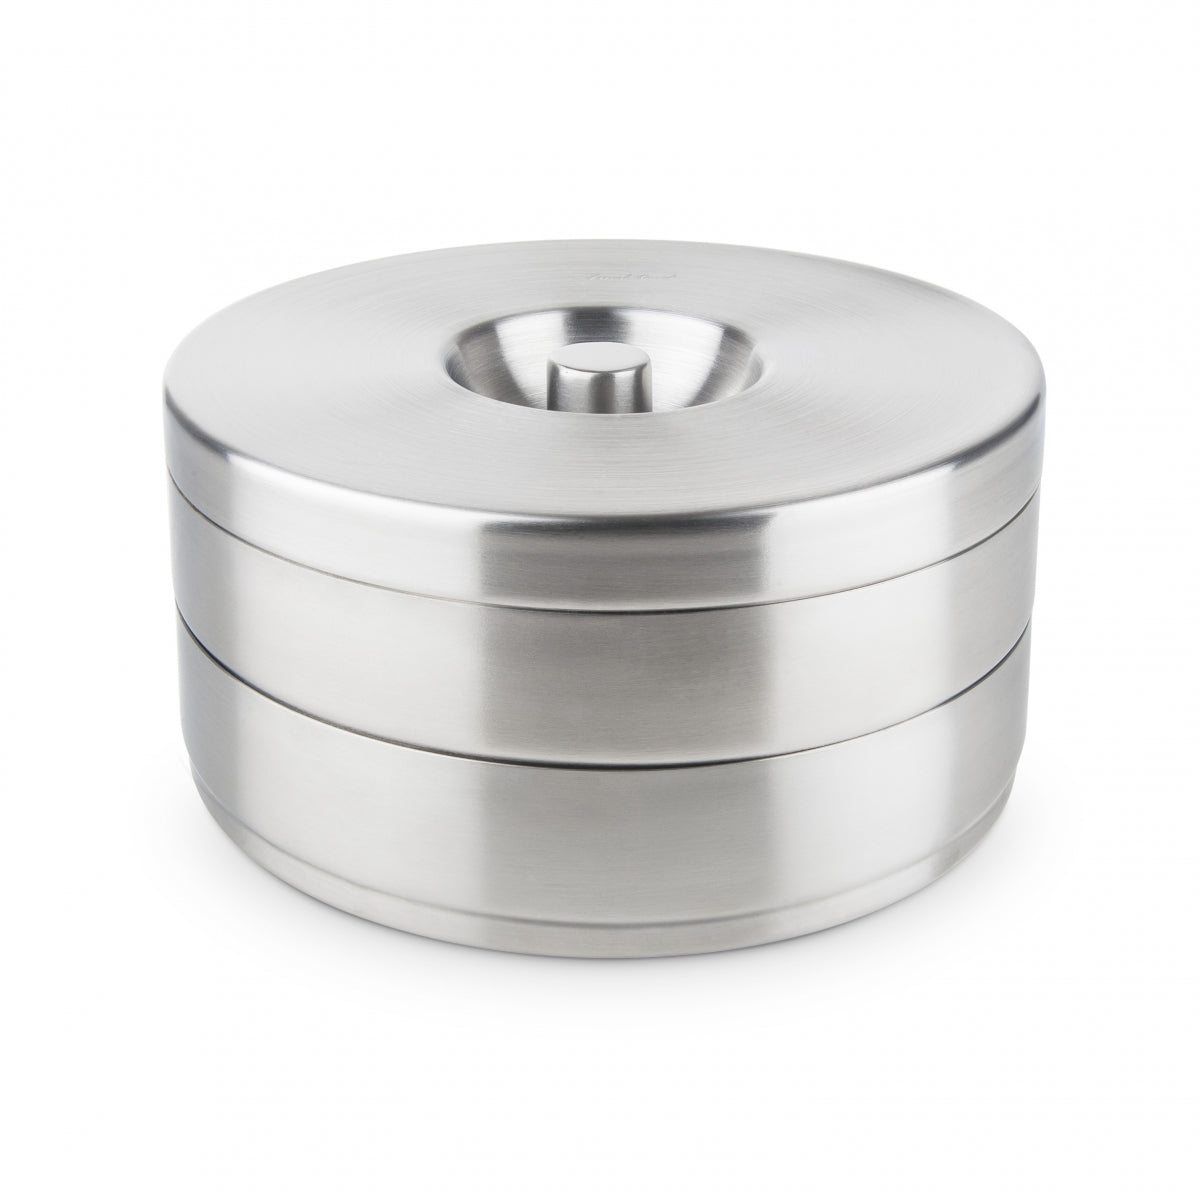 Cocktail Rimmer with Stainless Steel Lid-2 tier